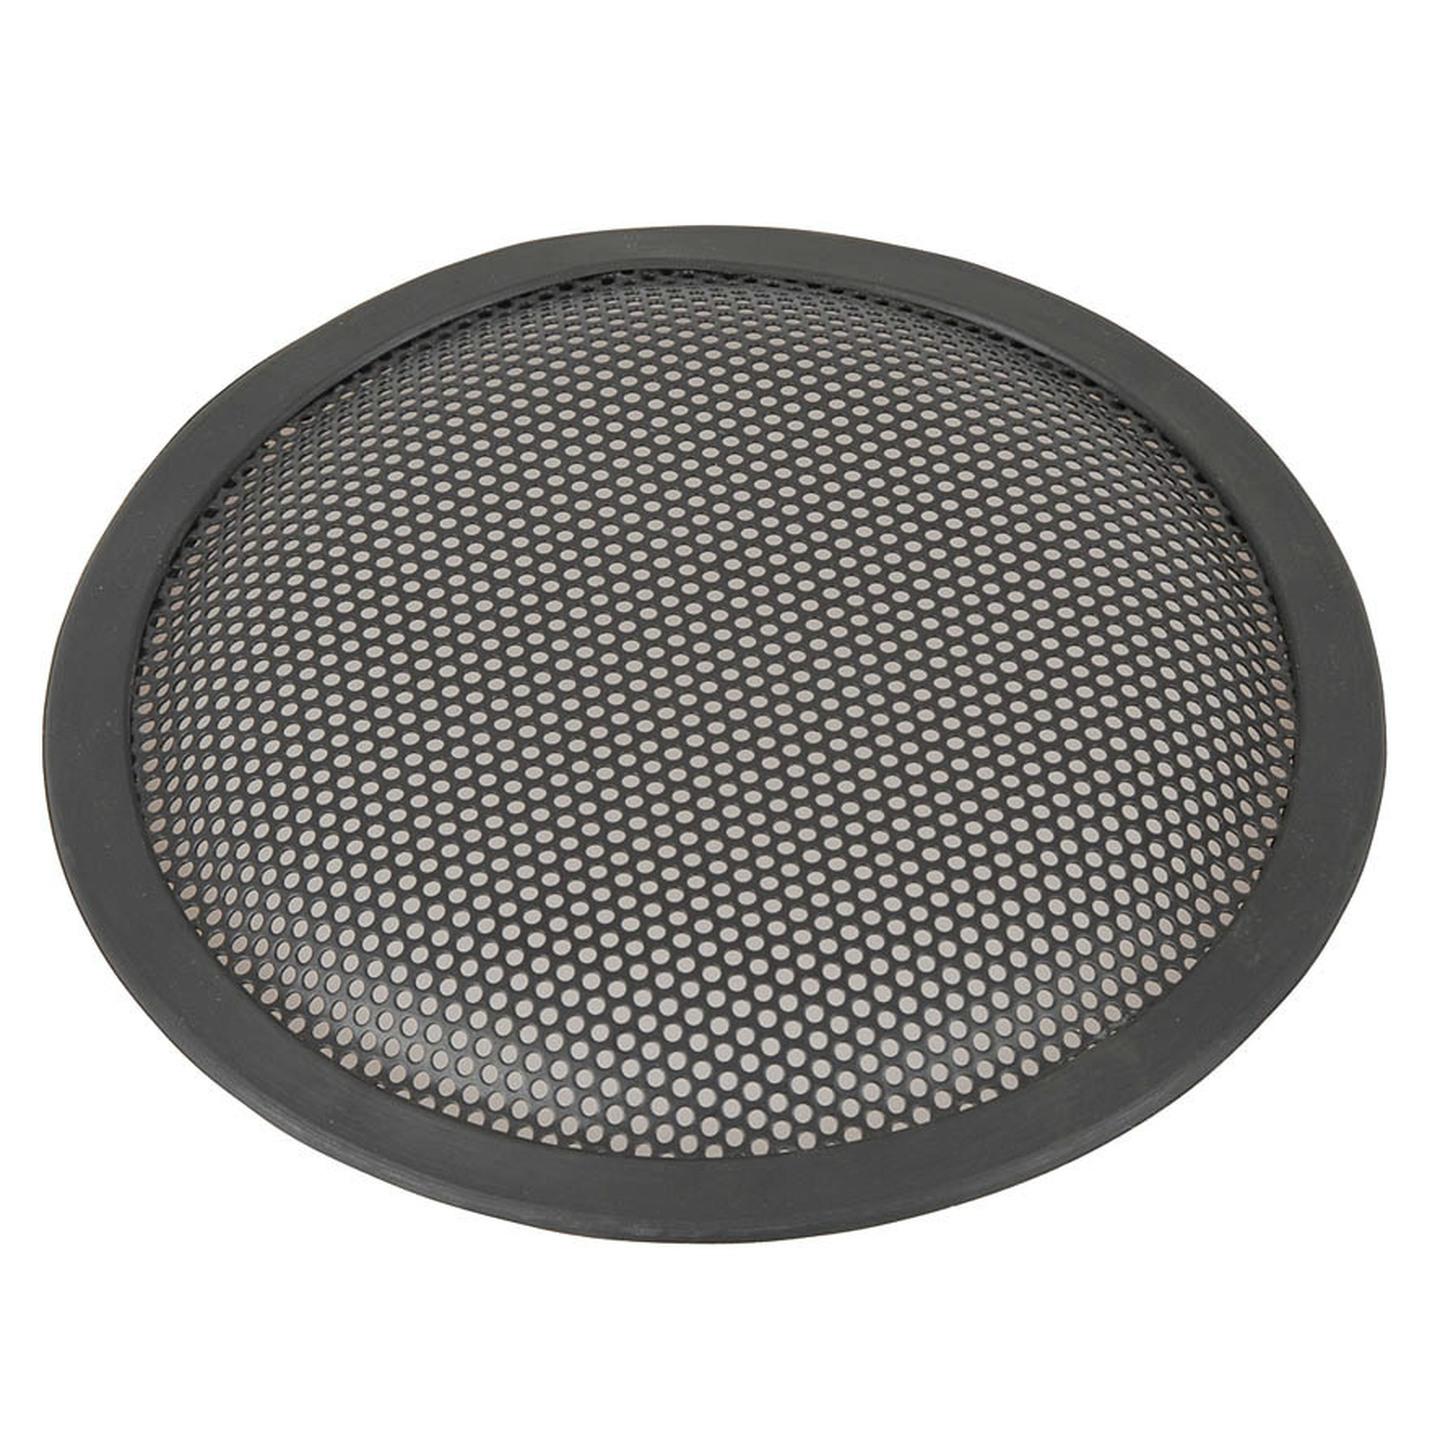 5 Speaker Protection Grille with Clips